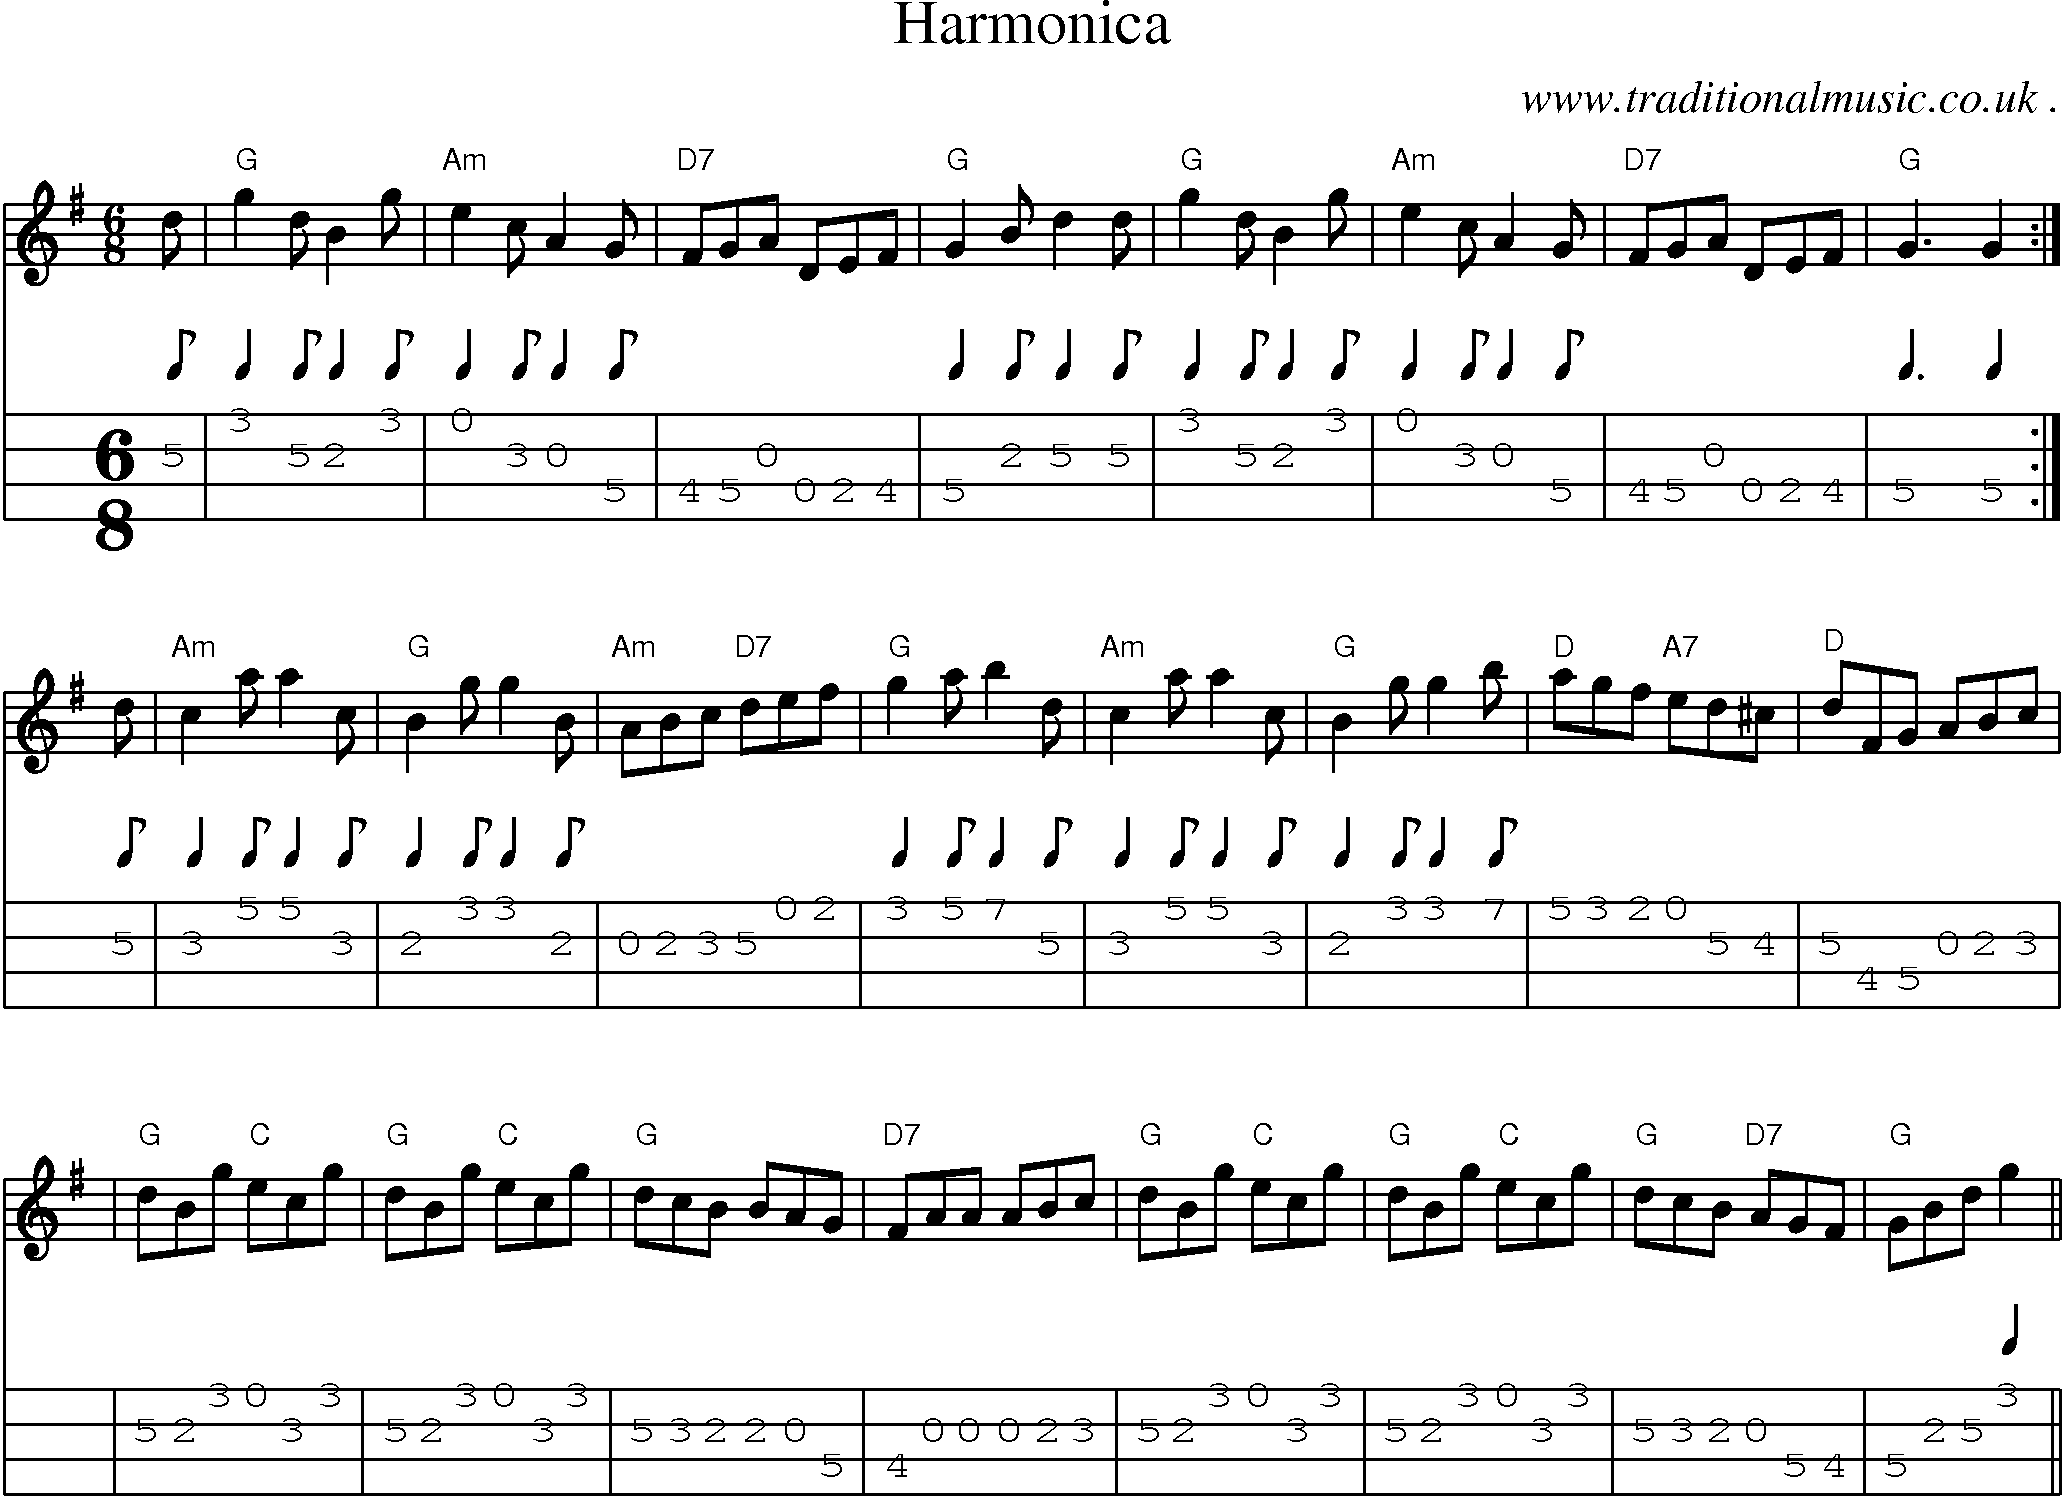 Sheet-music  score, Chords and Mandolin Tabs for Harmonica